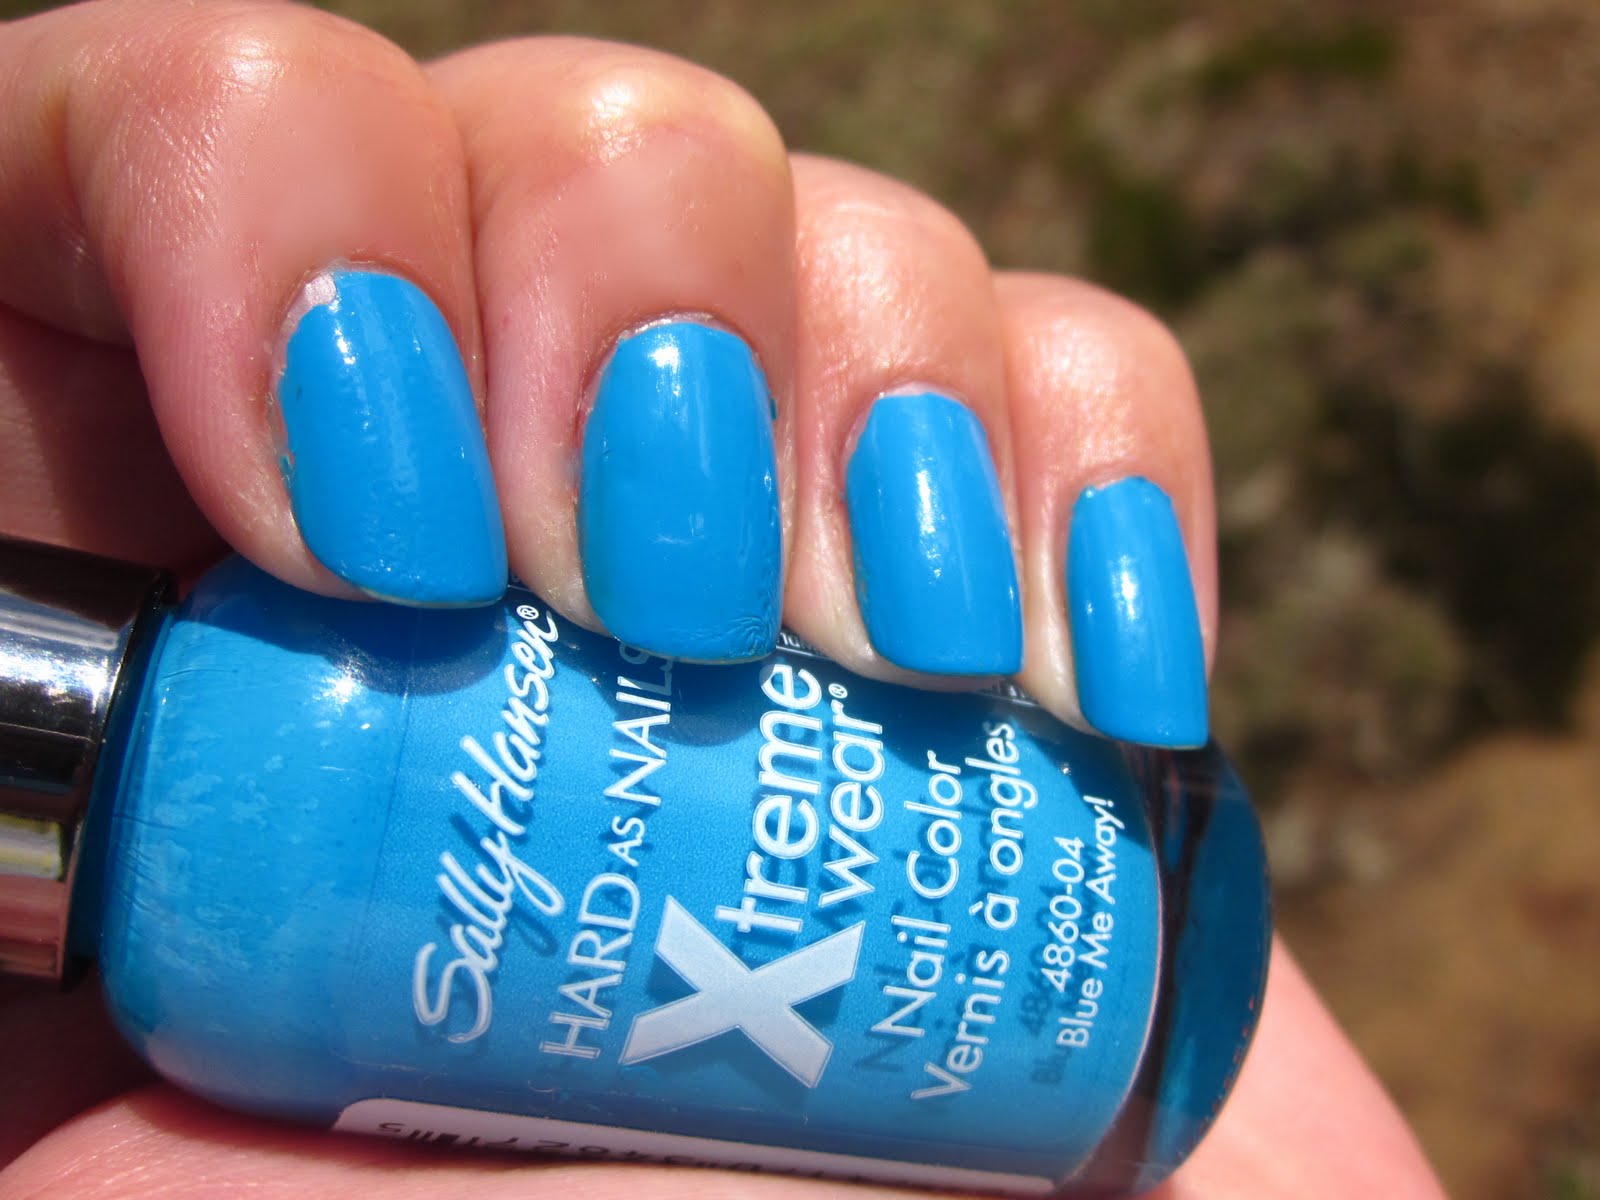 9. Sally Hansen Hard as Nails Xtreme Wear in "Blue Me Away" - wide 4